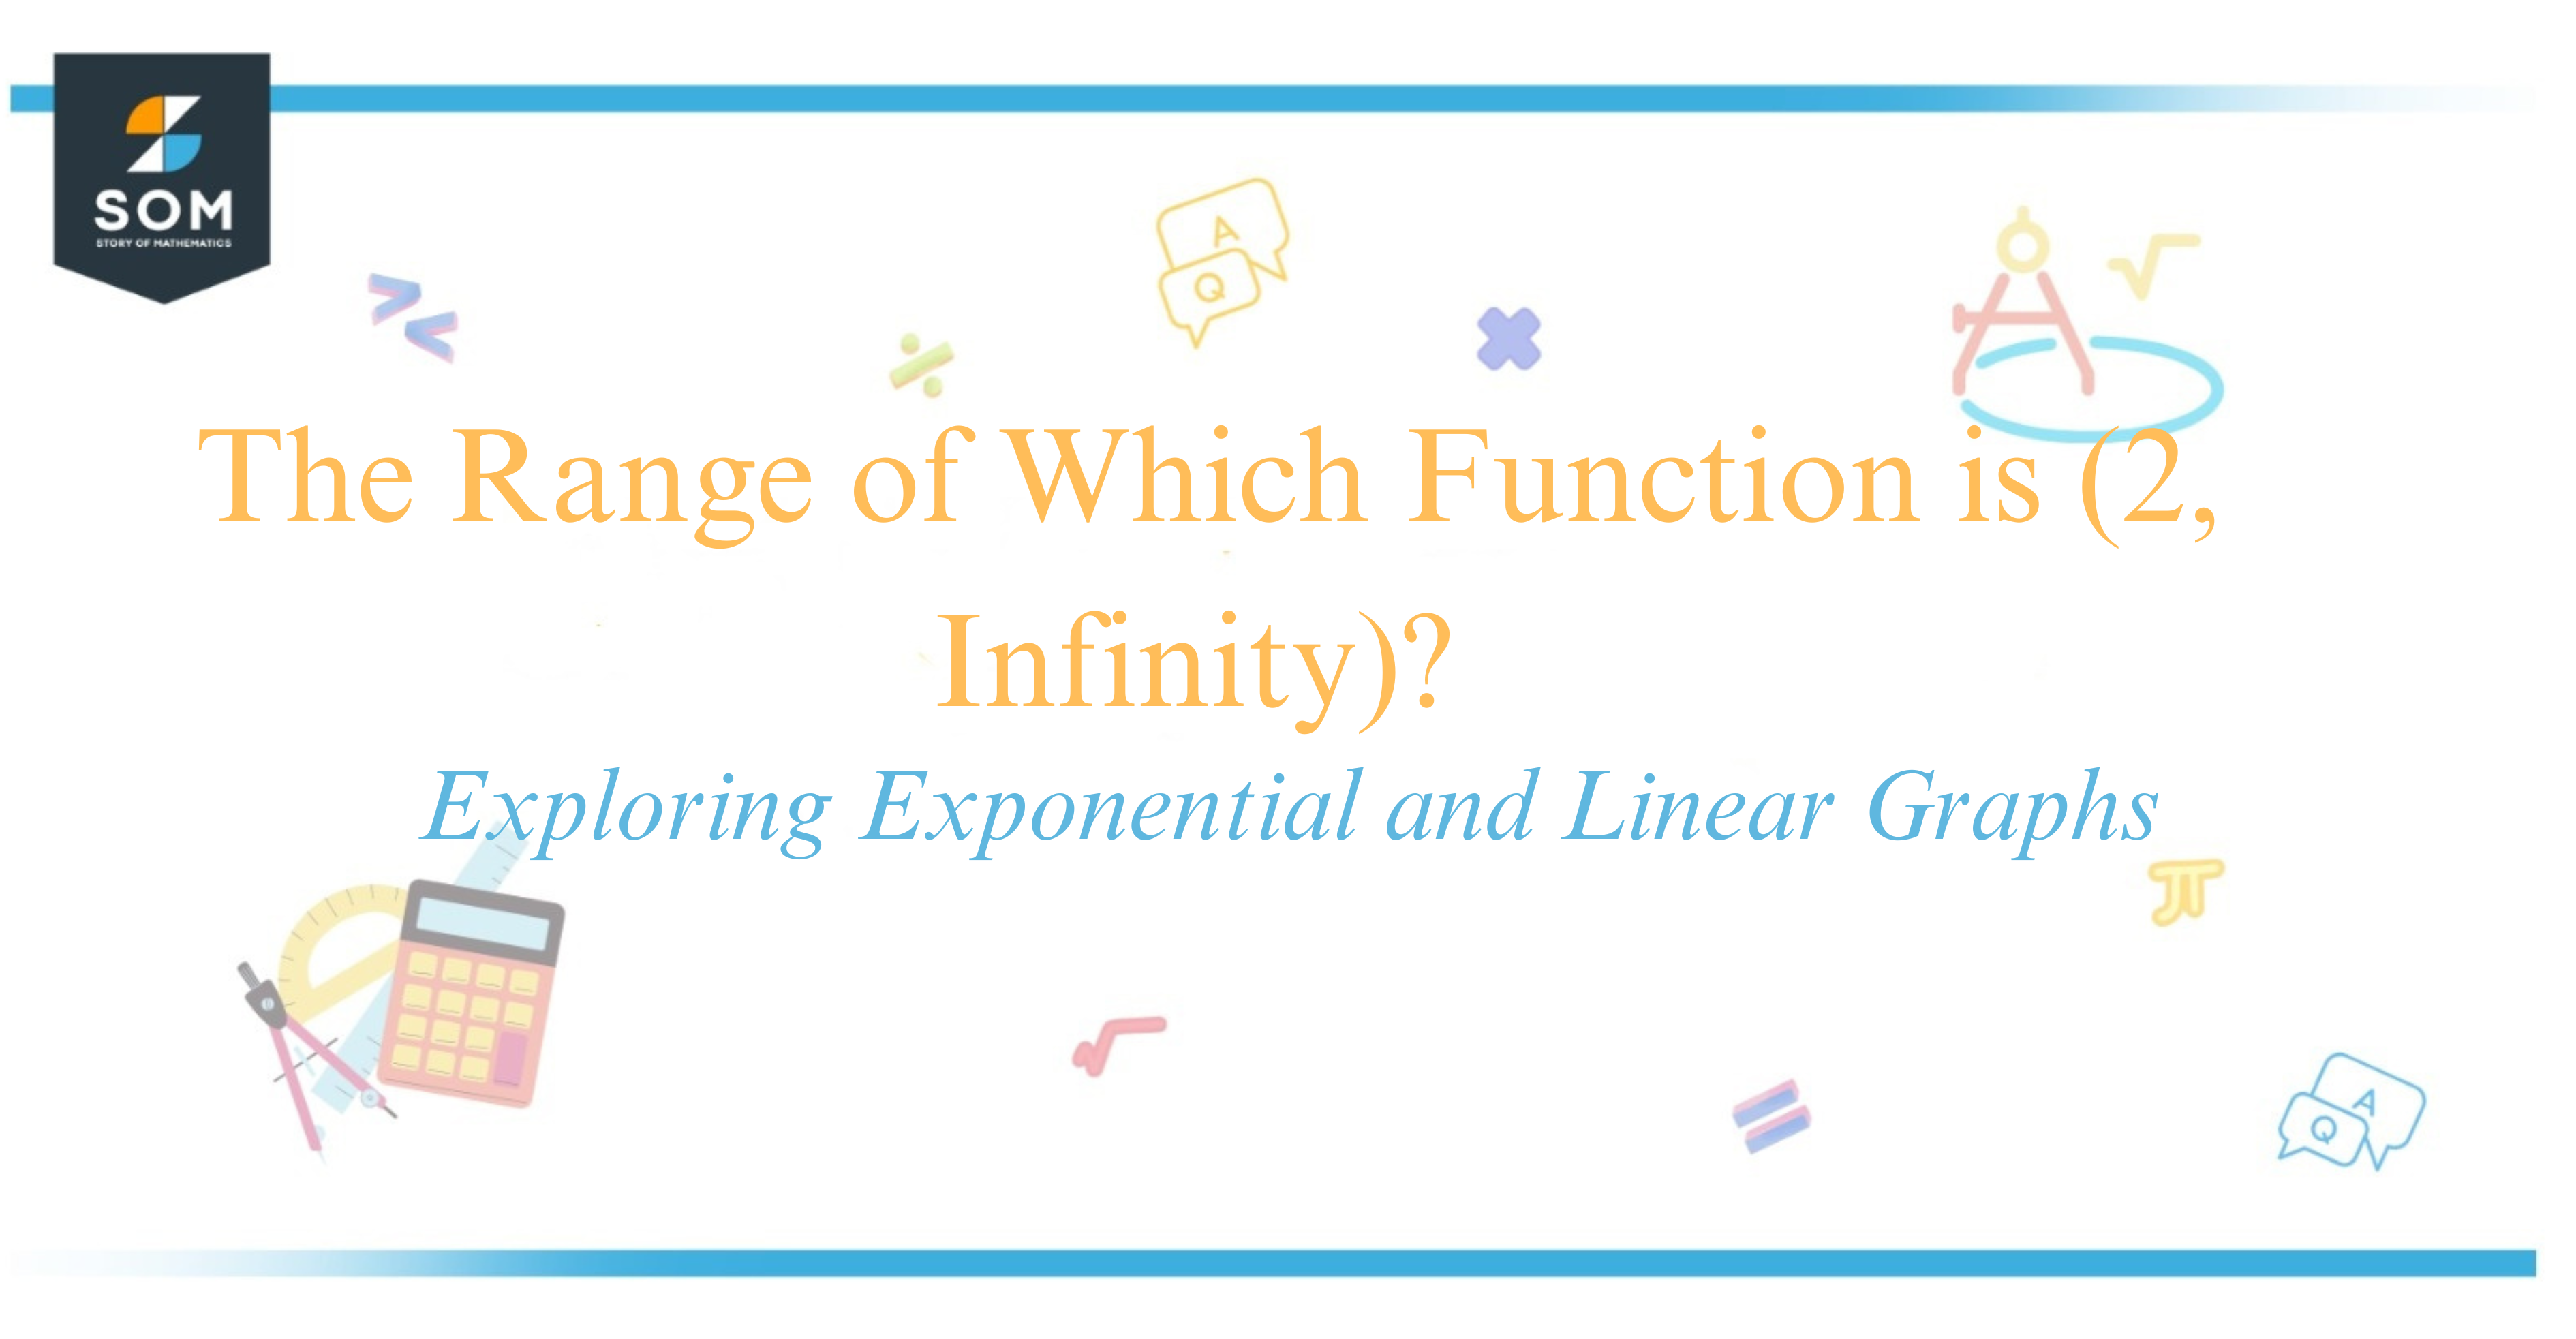 The Range of Which Function is (2, Infinity) Exploring Exponential and Linear Graphs